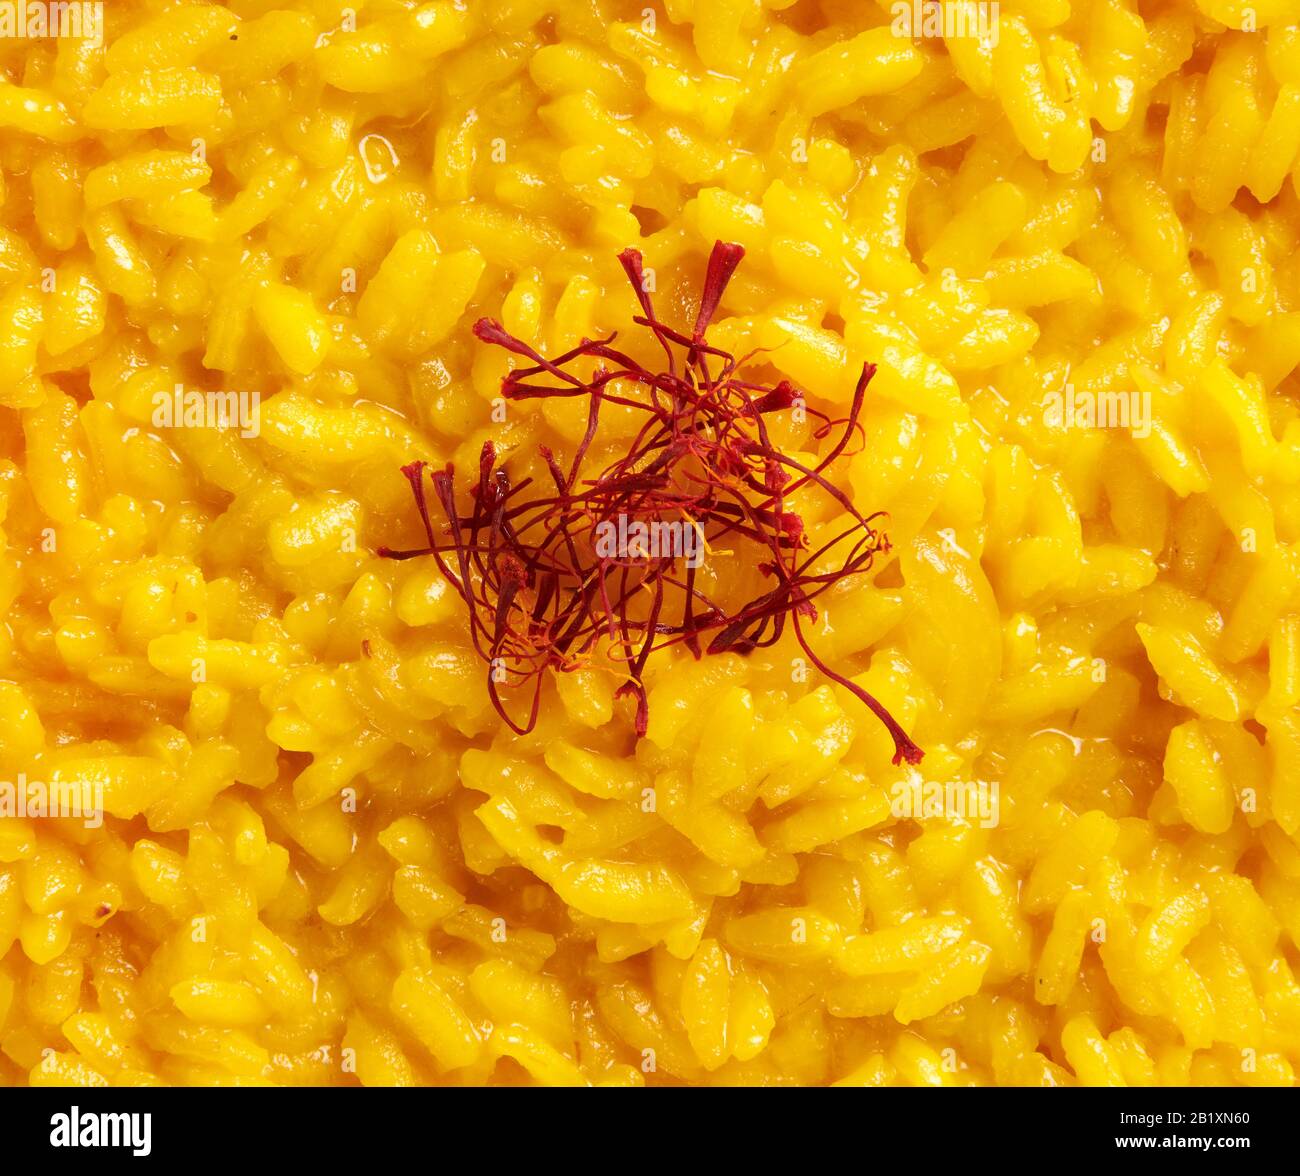 Full frame texture of creamy yellow Italian risotto rice garnished with saffron pistils or threads, a luxury spice, from the Lombardy region of Italy Stock Photo